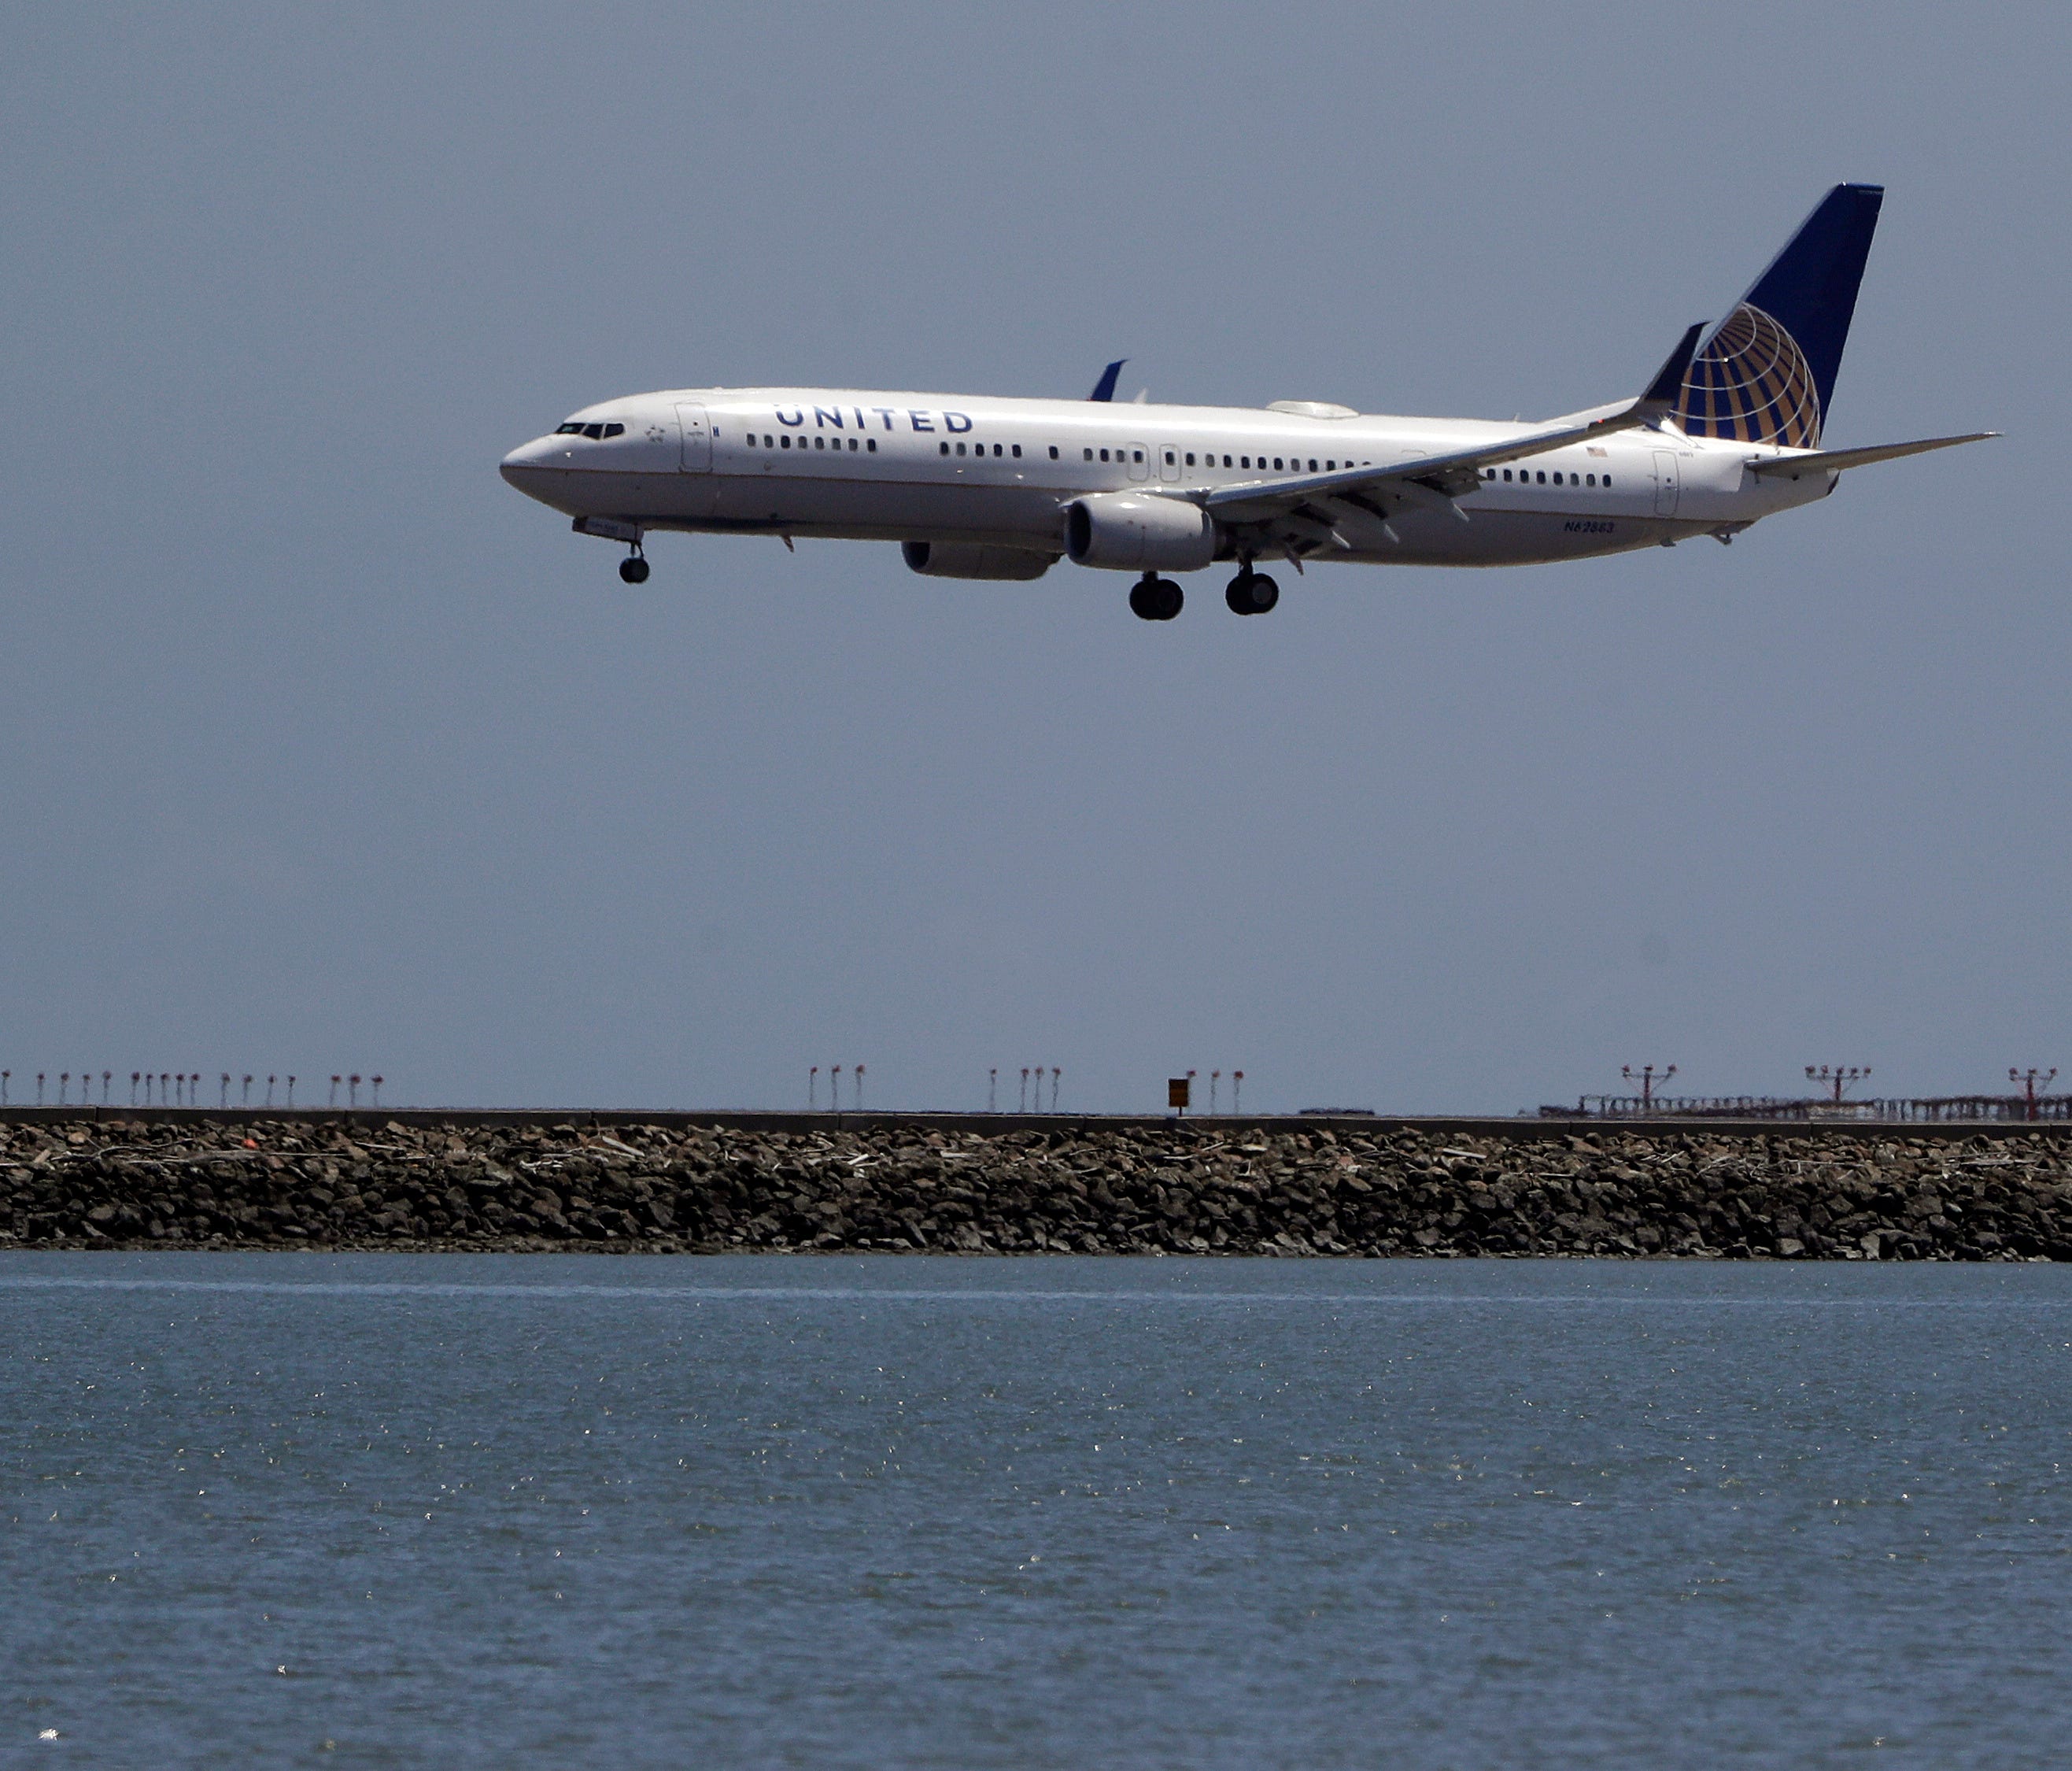 A United Airlines plane lands at San Francisco International Airport on July 11, 2017.